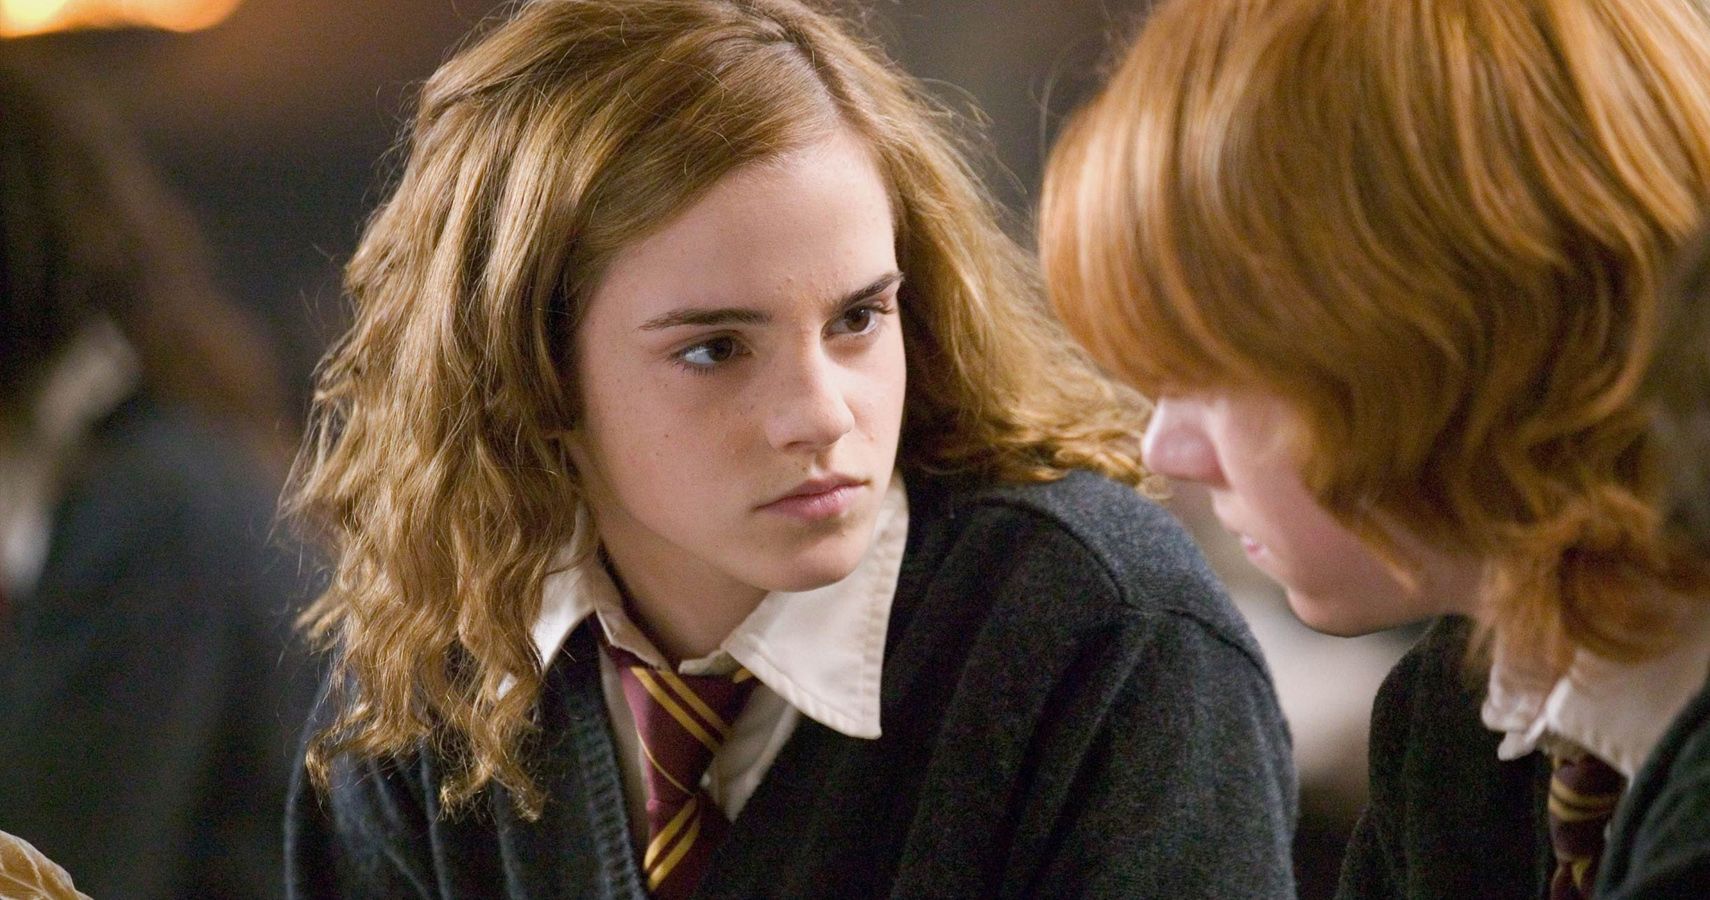 Harry Potter Hermiones 10 Biggest Mistakes (That We Can Learn From)